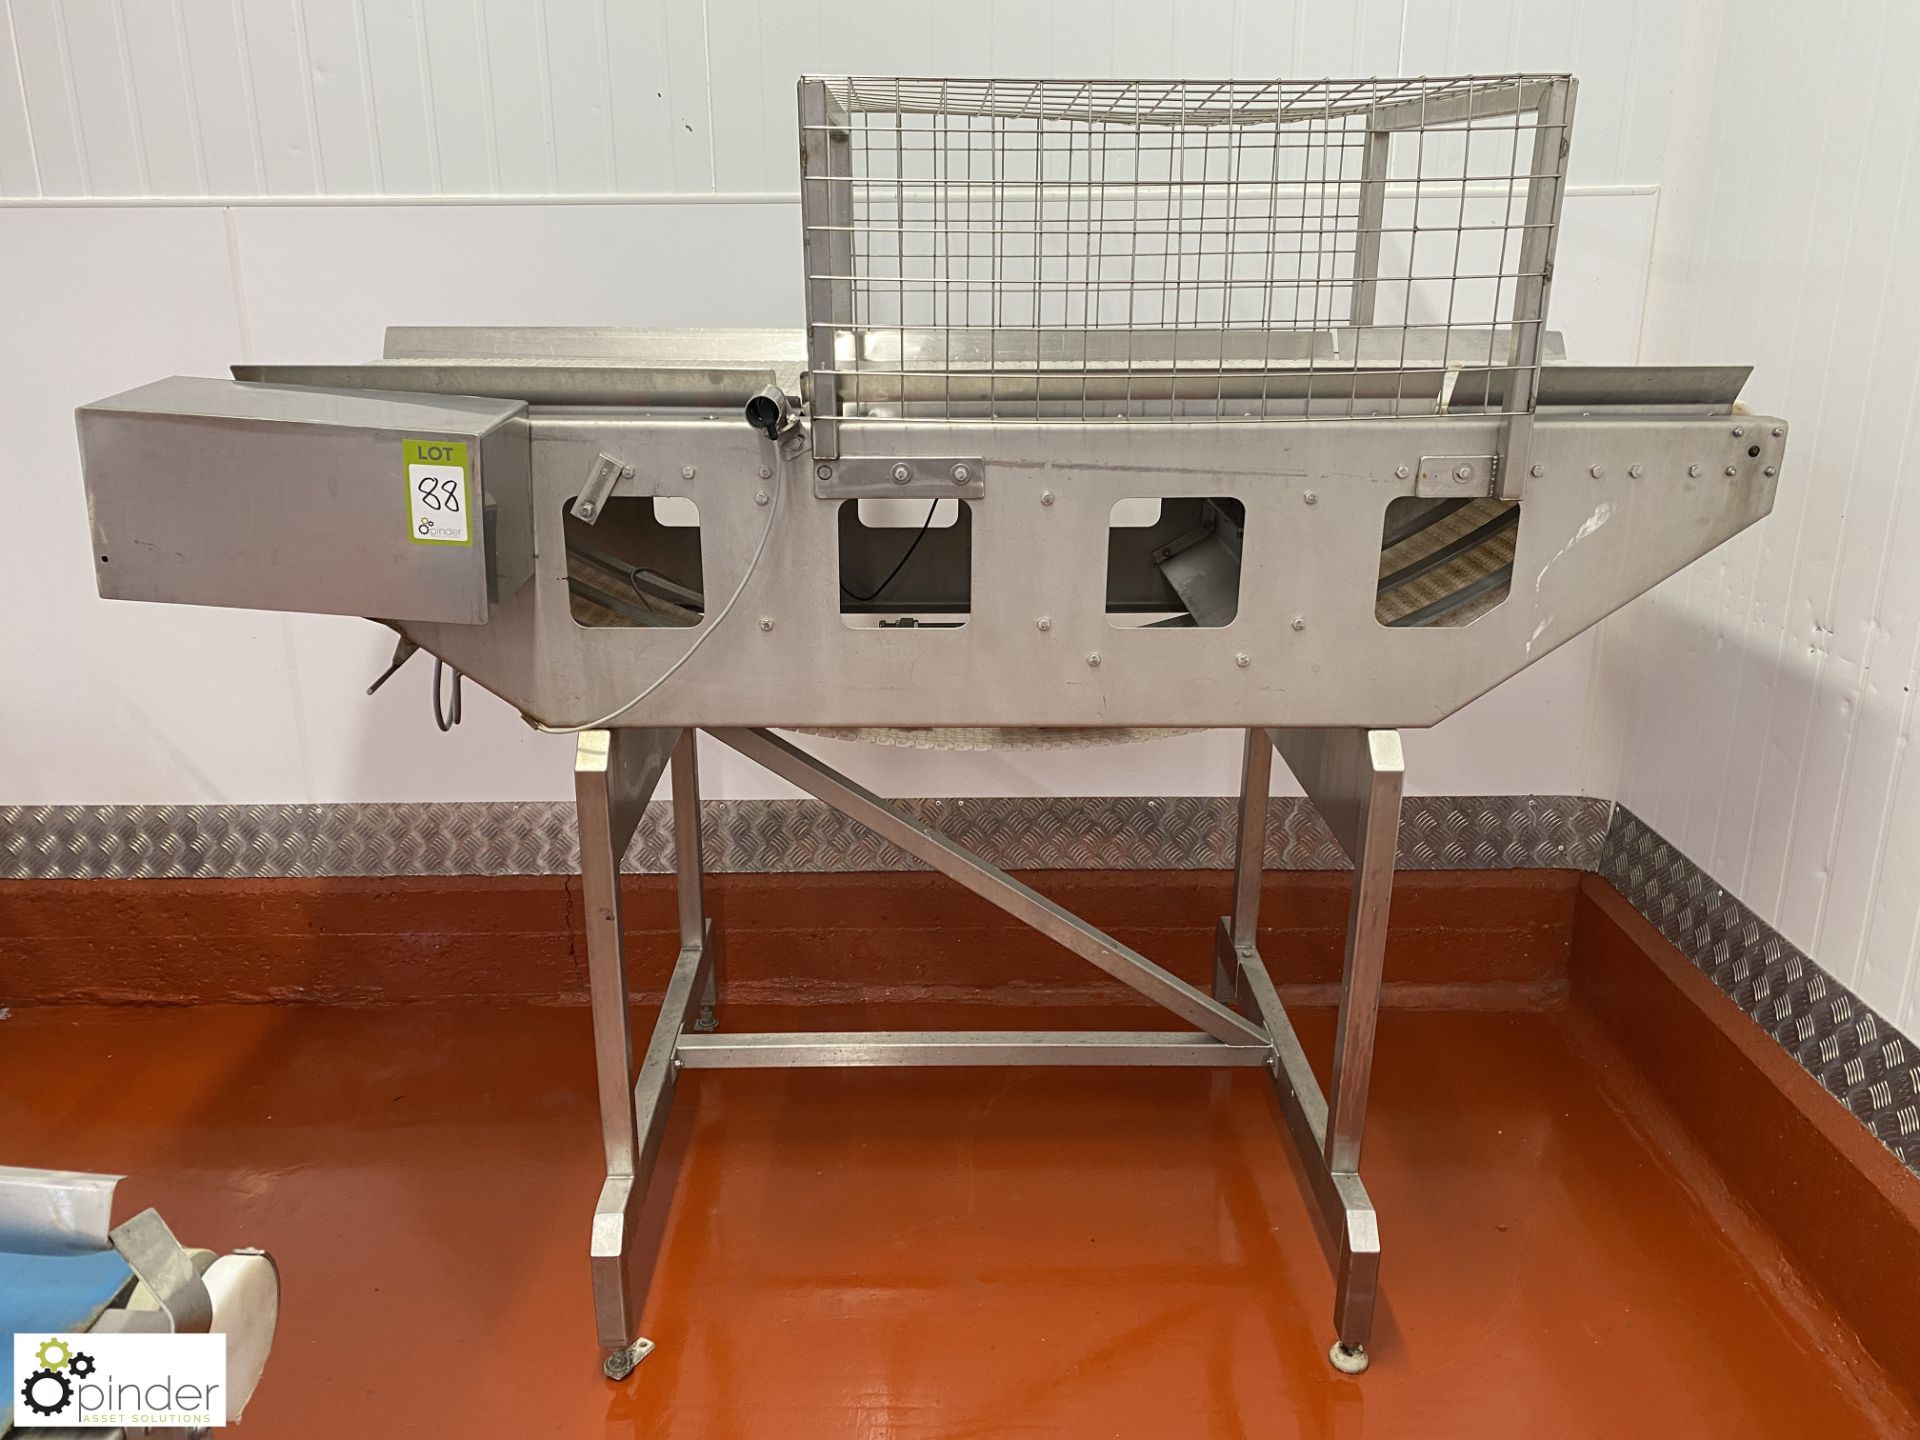 Stainless steel Conveyor System, 1900mm x 450mm, 400volts (Lift Out Fee: £30 plus VAT)